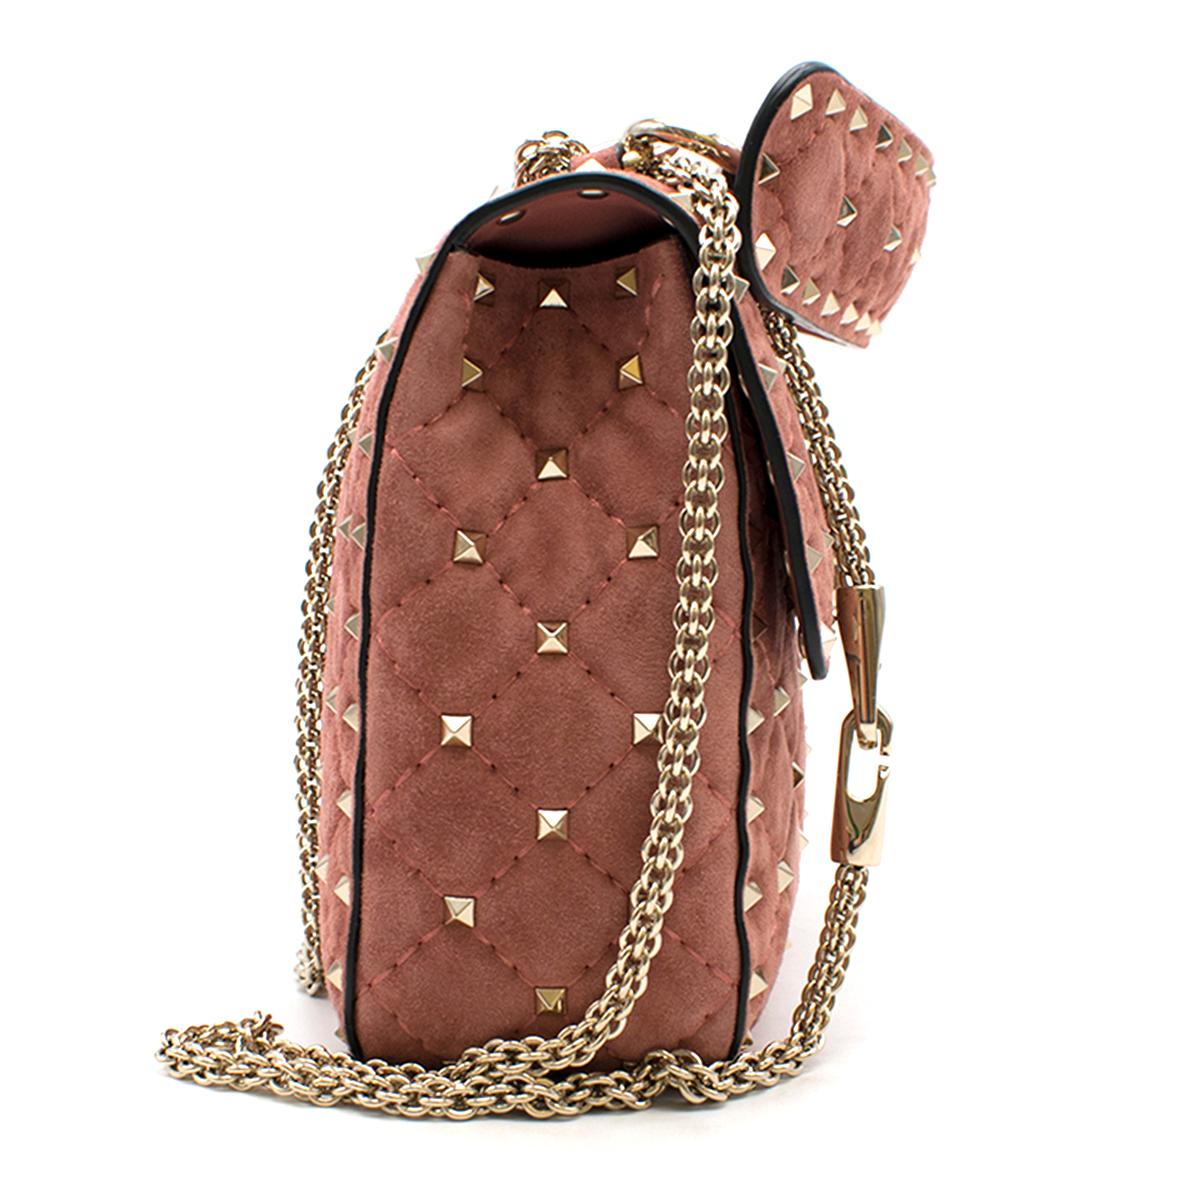 Valentino Pink Suede Rockstud Spike Medium Chain Bag

- Valentino Garavani Rockstud Spike medium chain bag in rose pink suede. 
- Micro stud detailing.
- Thanks to the detachable top handle and the sliding and detachable chain strap, the bag can be